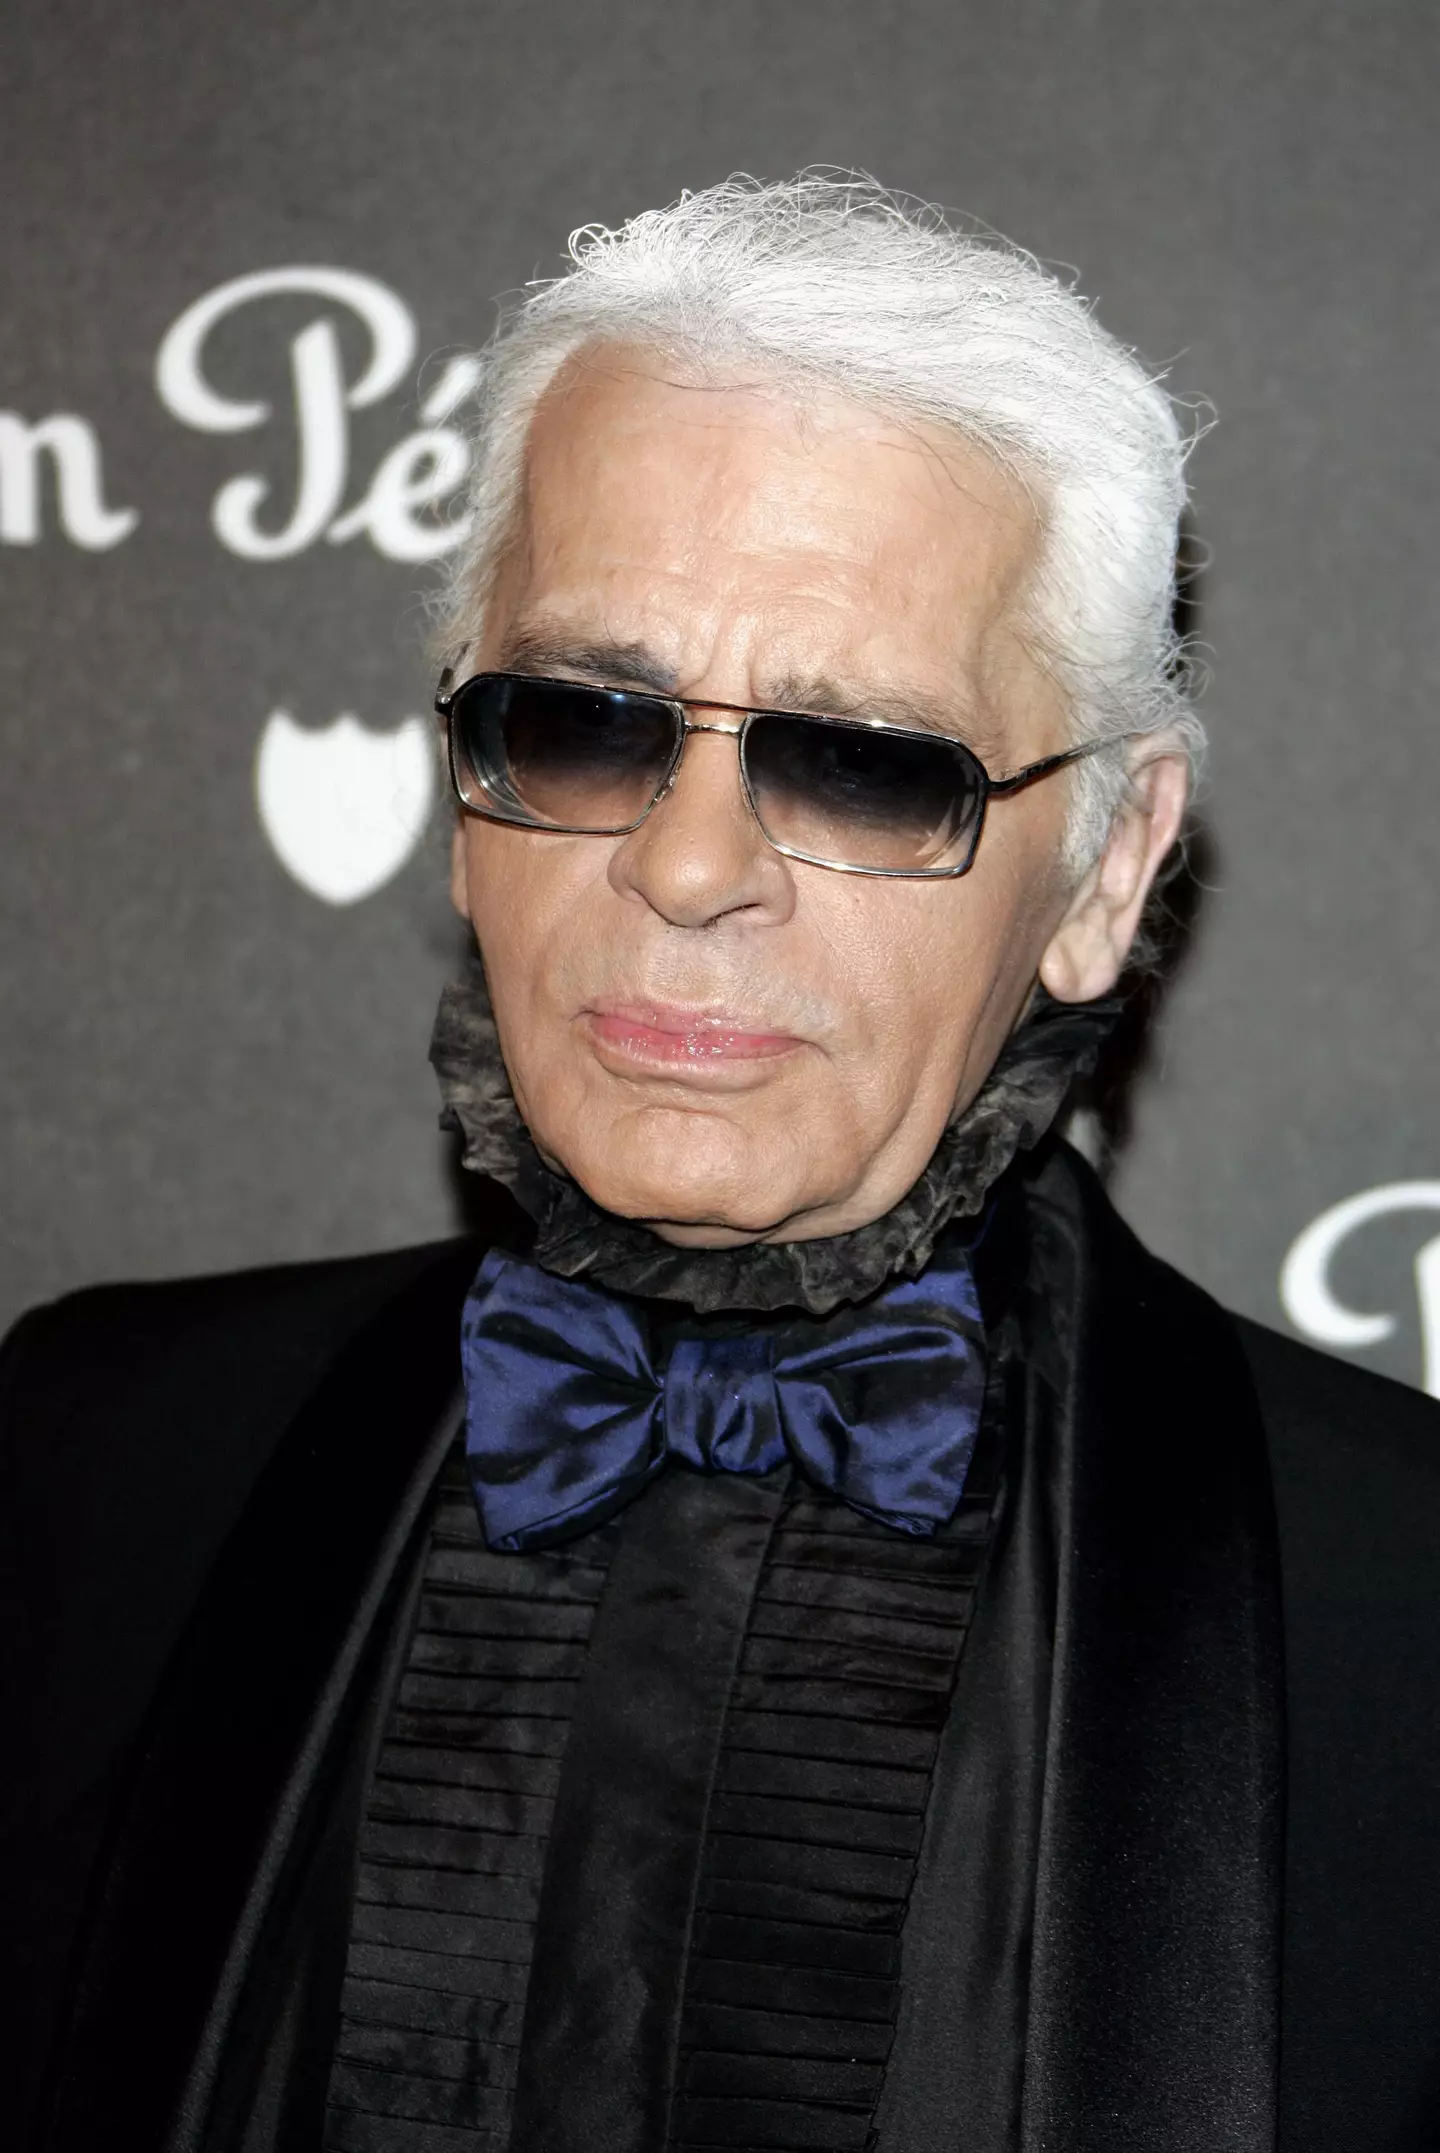 Karl Lagerfeld is this year's theme.